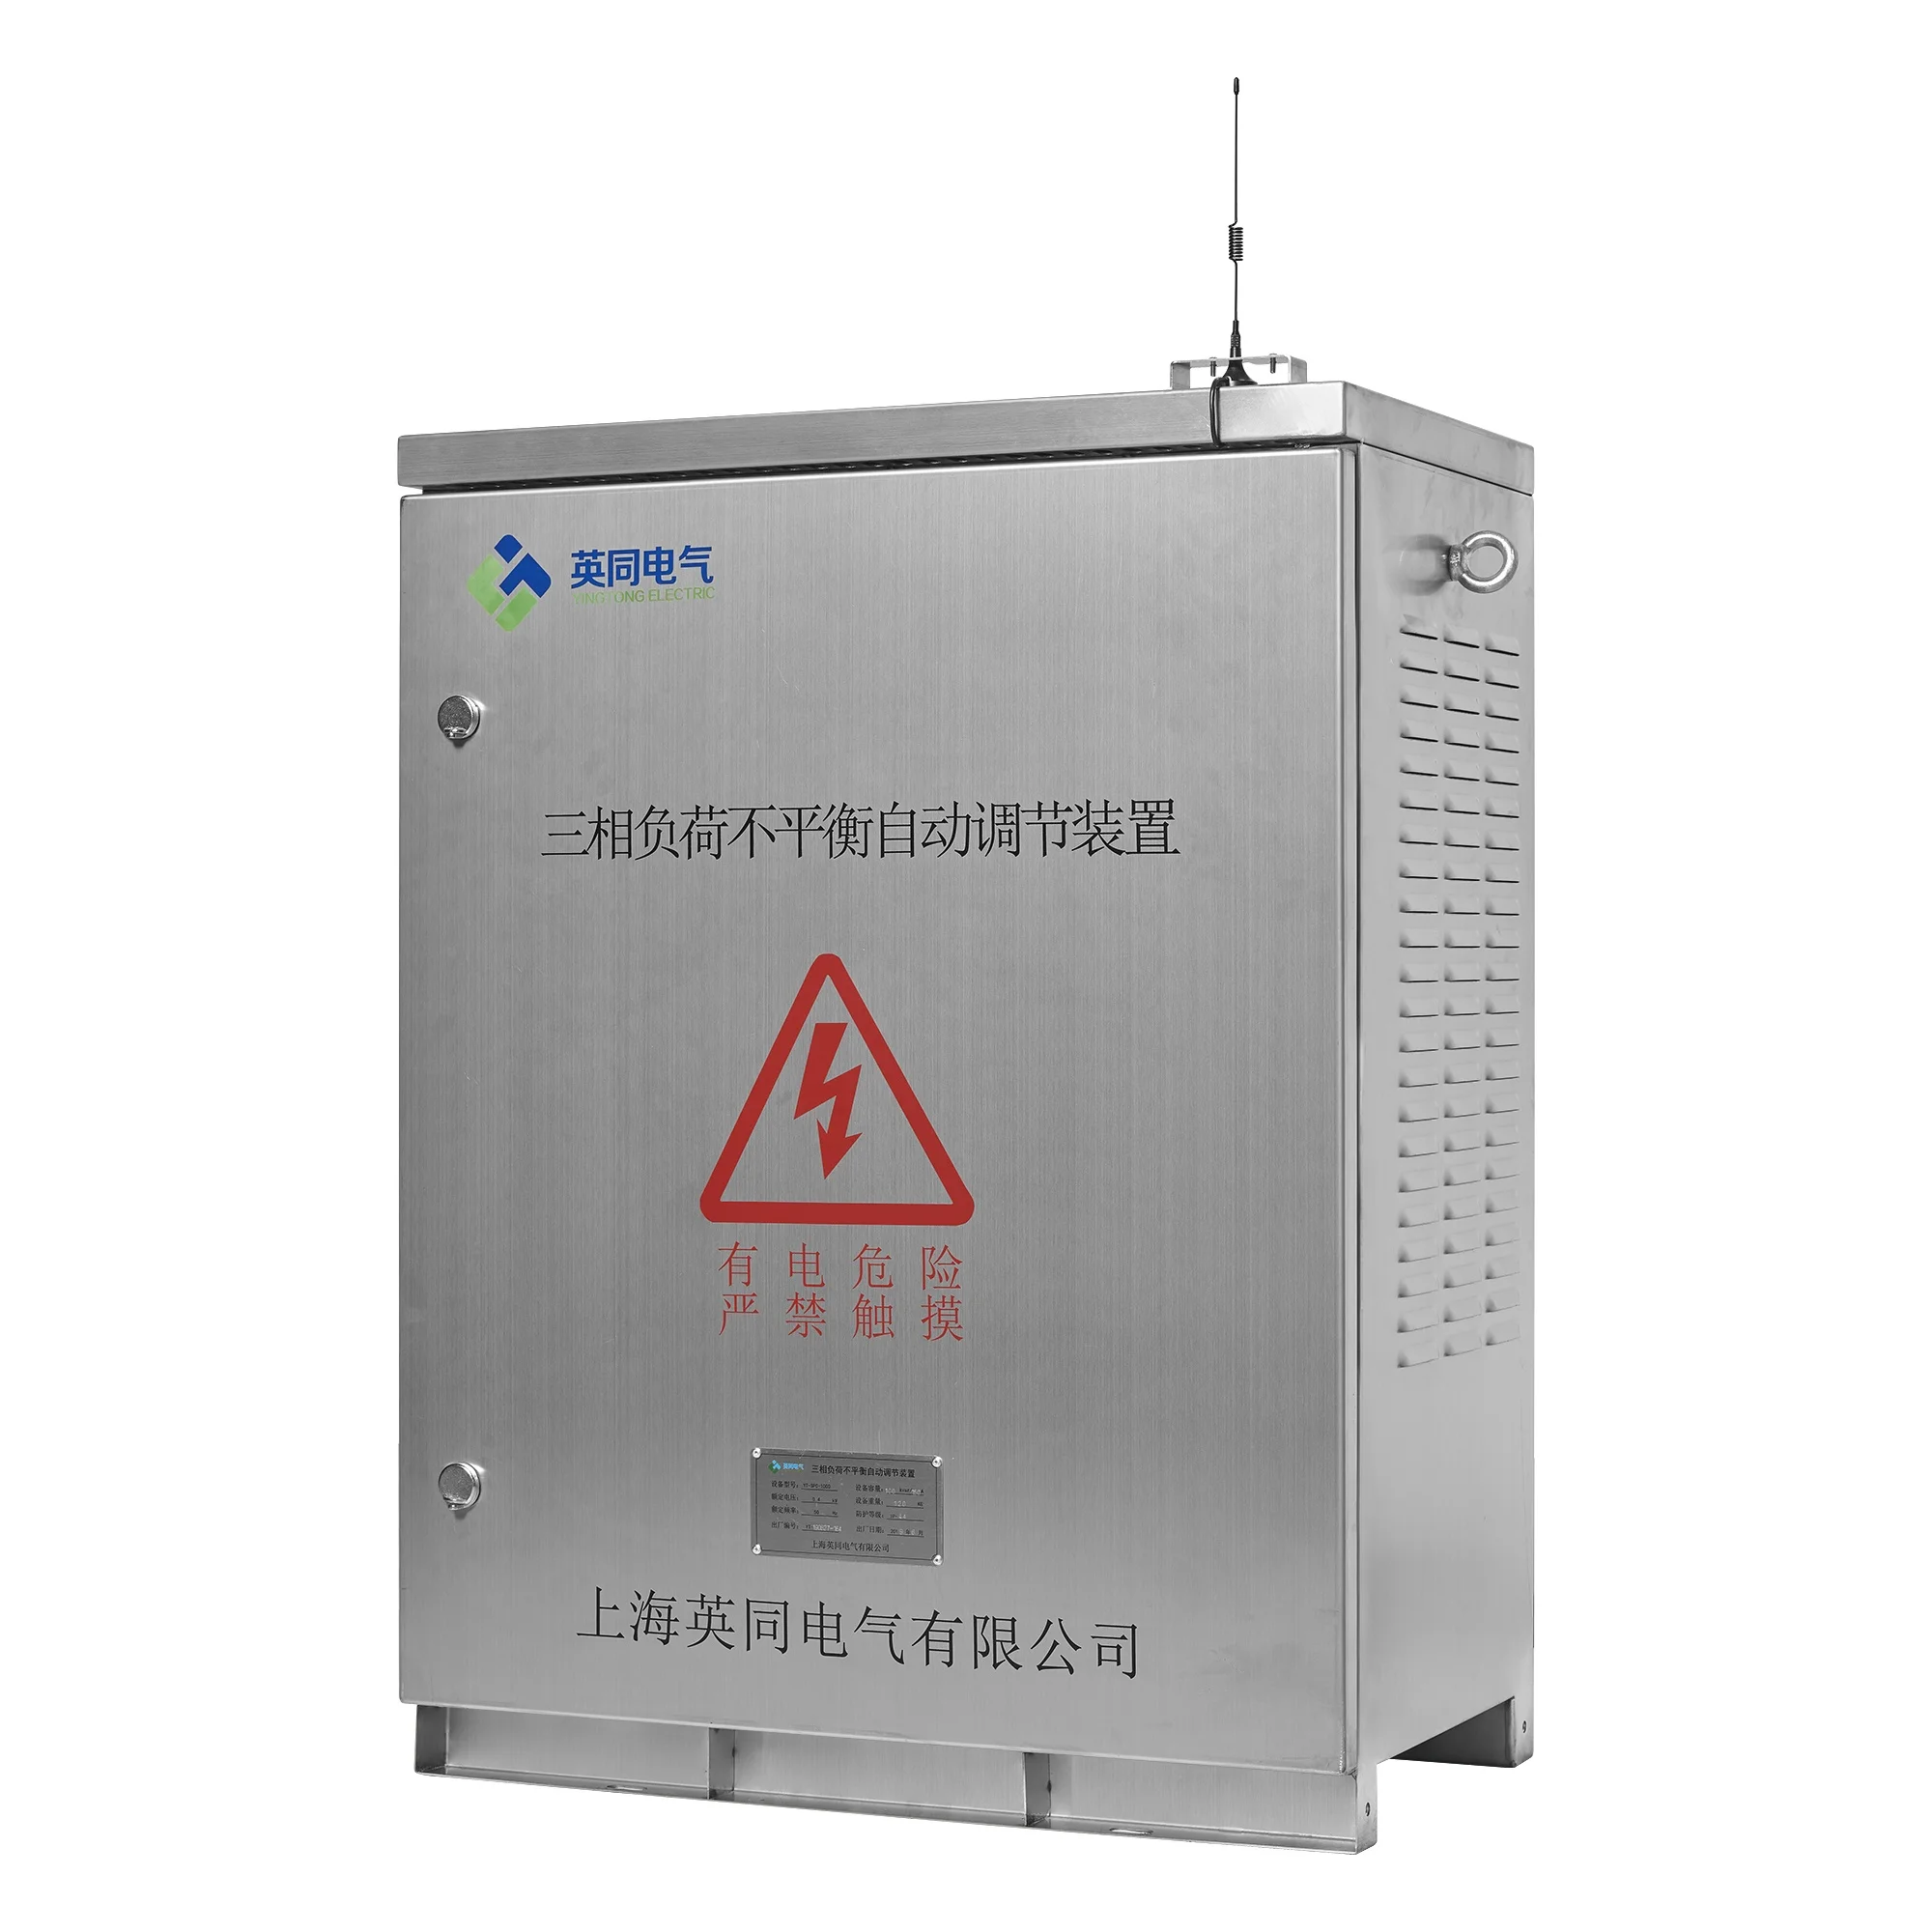 Three Phase Distribution Box Din Rail Electrical Panel Box Steel Wall Mount Distribution Control Box Boards Max Gray Series Amps